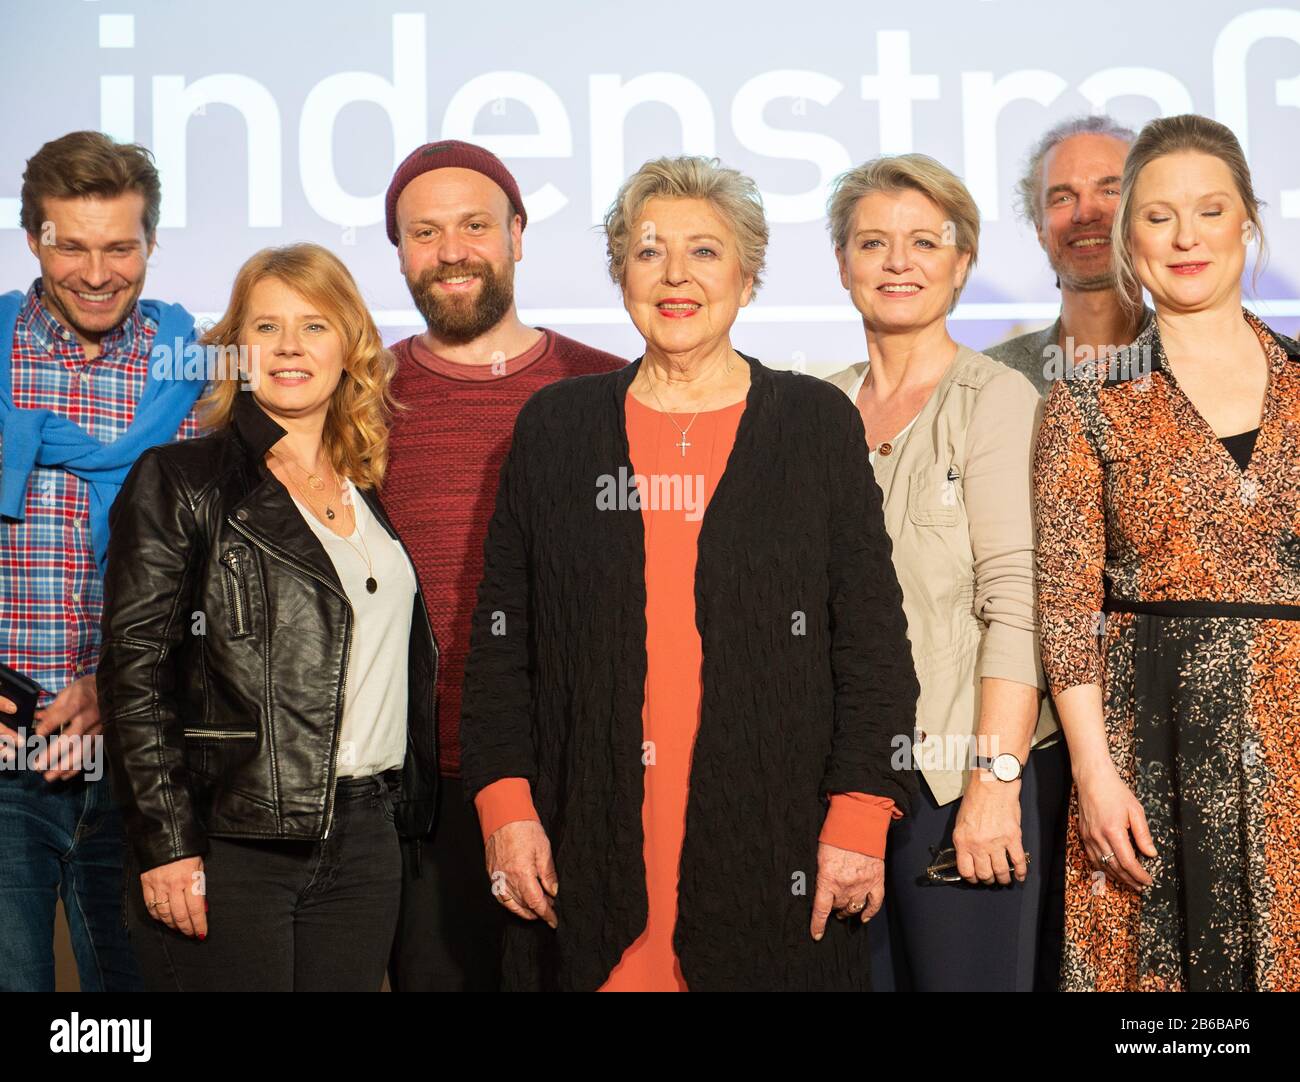 Langenhagen, Germany. 10th Mar, 2020. At a press conference of long-standing performers of the ARD cult series 'Lindenstraße' in the Maritim Hotel at Hanover Airport, the actors (l-r) Felix Maximilian, Jacqueline Svilarov, Moritz A. Sachs, Marie-Luise Marjan, Andrea Spatzek, Moritz Zielke and Sybille Waury will be available for a group photo. After 34 years, the last episode of the TV series 'Lindenstraße' will be broadcast on 29.03.20. Credit: Lucas Bäuml/dpa/Alamy Live News Stock Photo